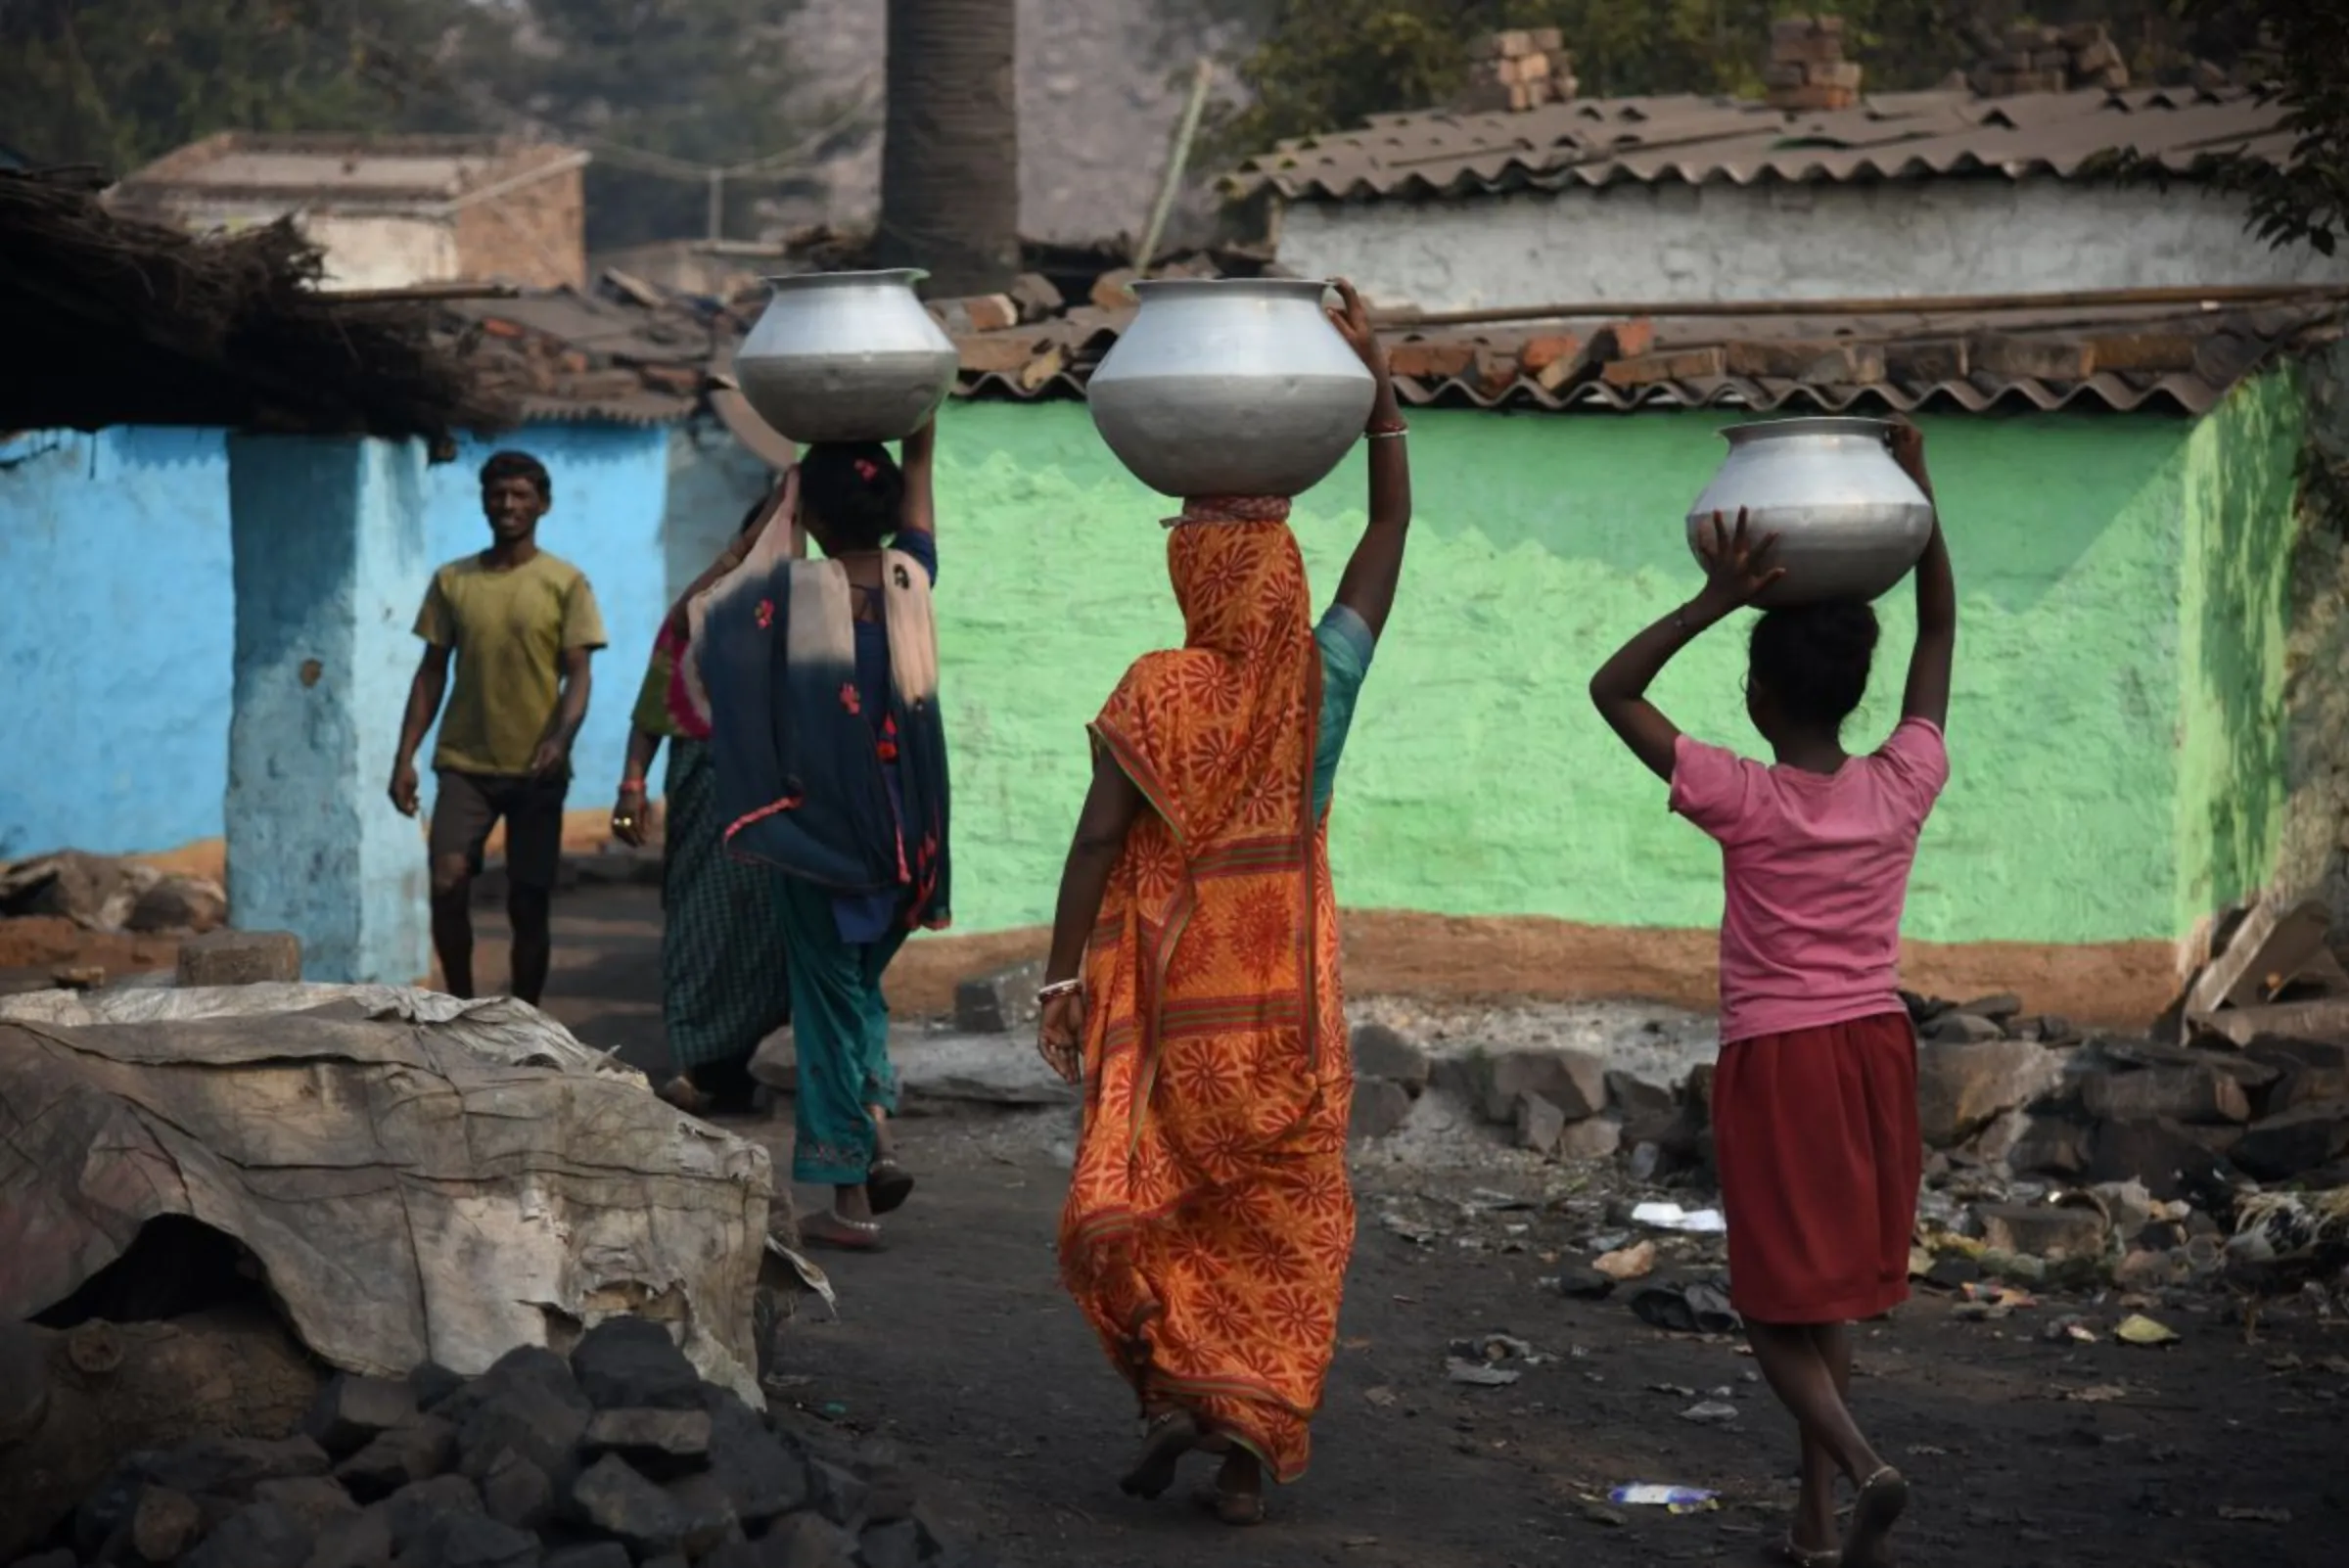 Women prepare for their weekly bath at Golakdhi settlement in Jharia coalfield, India, on November 10, 2022. Thomson Reuters Foundation/Tanmoy Bhaduri